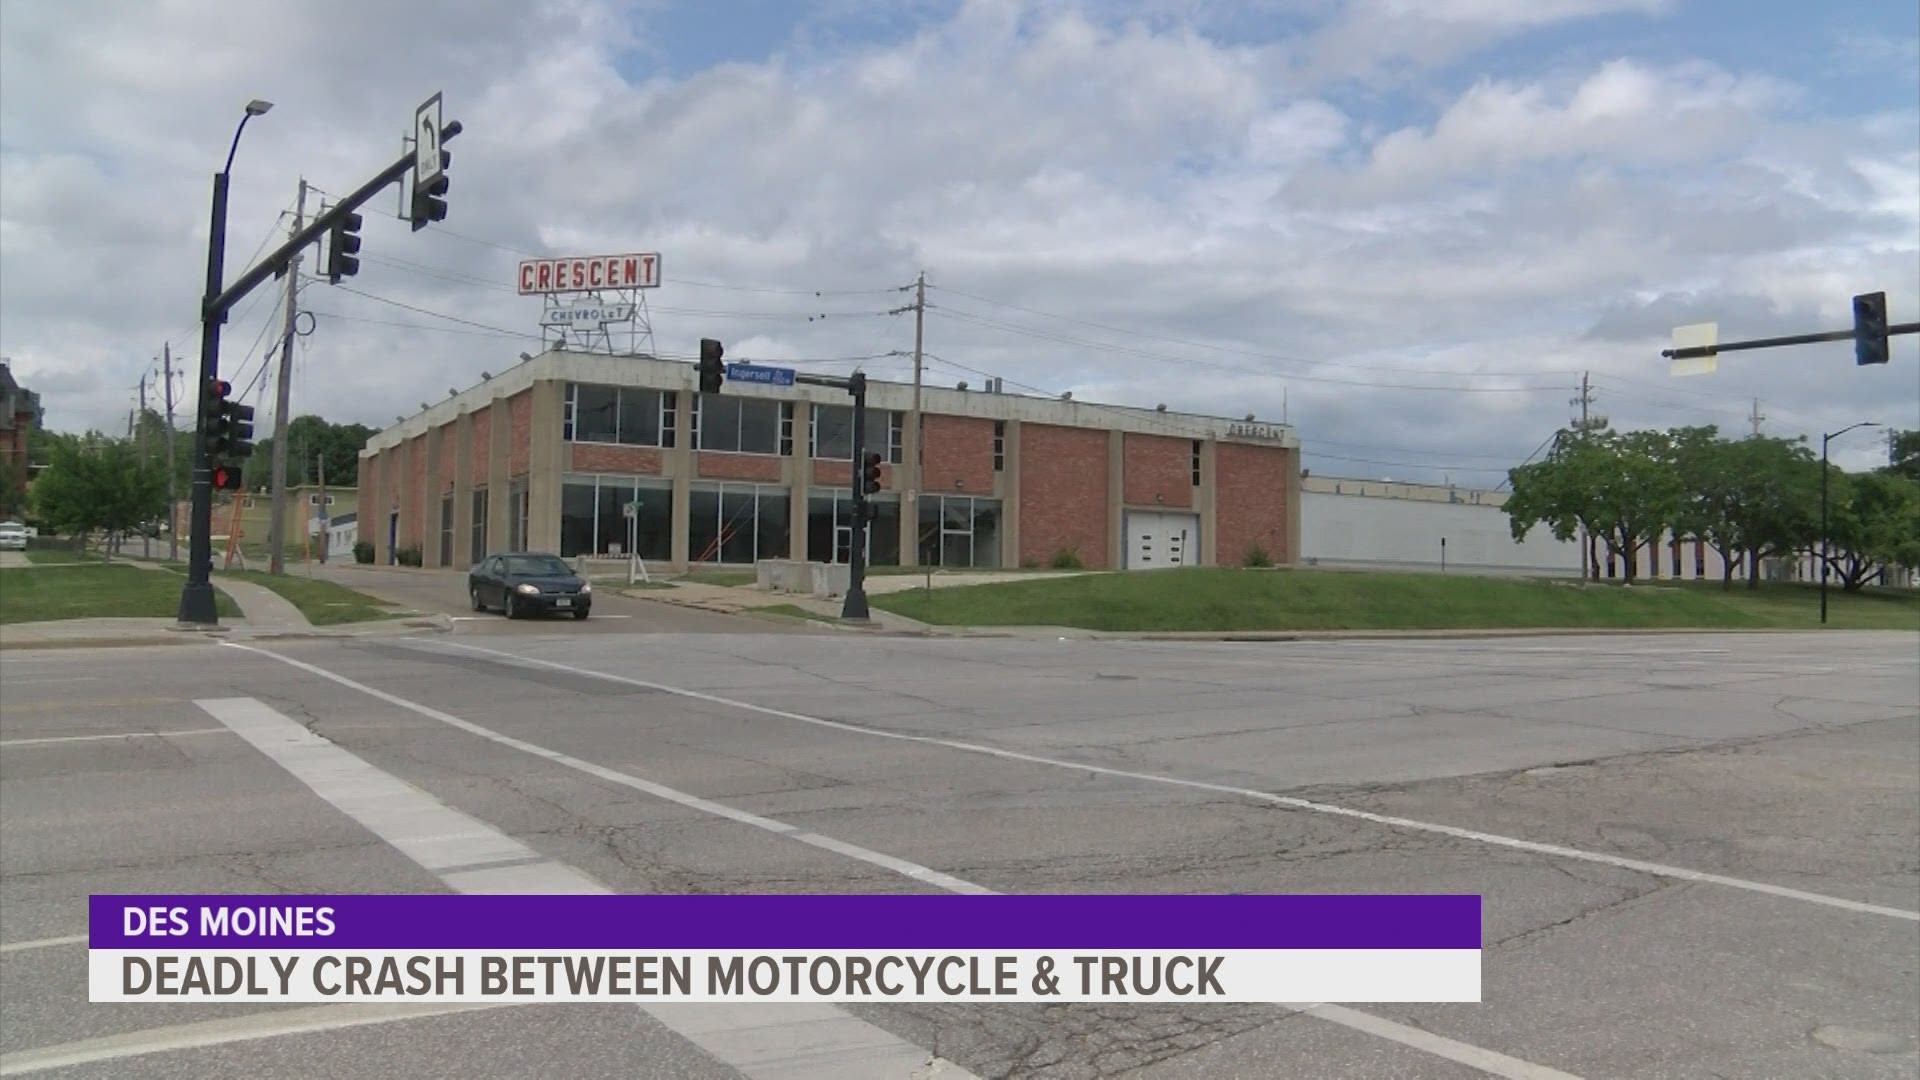 The motorcyclist was driving "at a high rate of speed" according to the Des Moines Police Department.